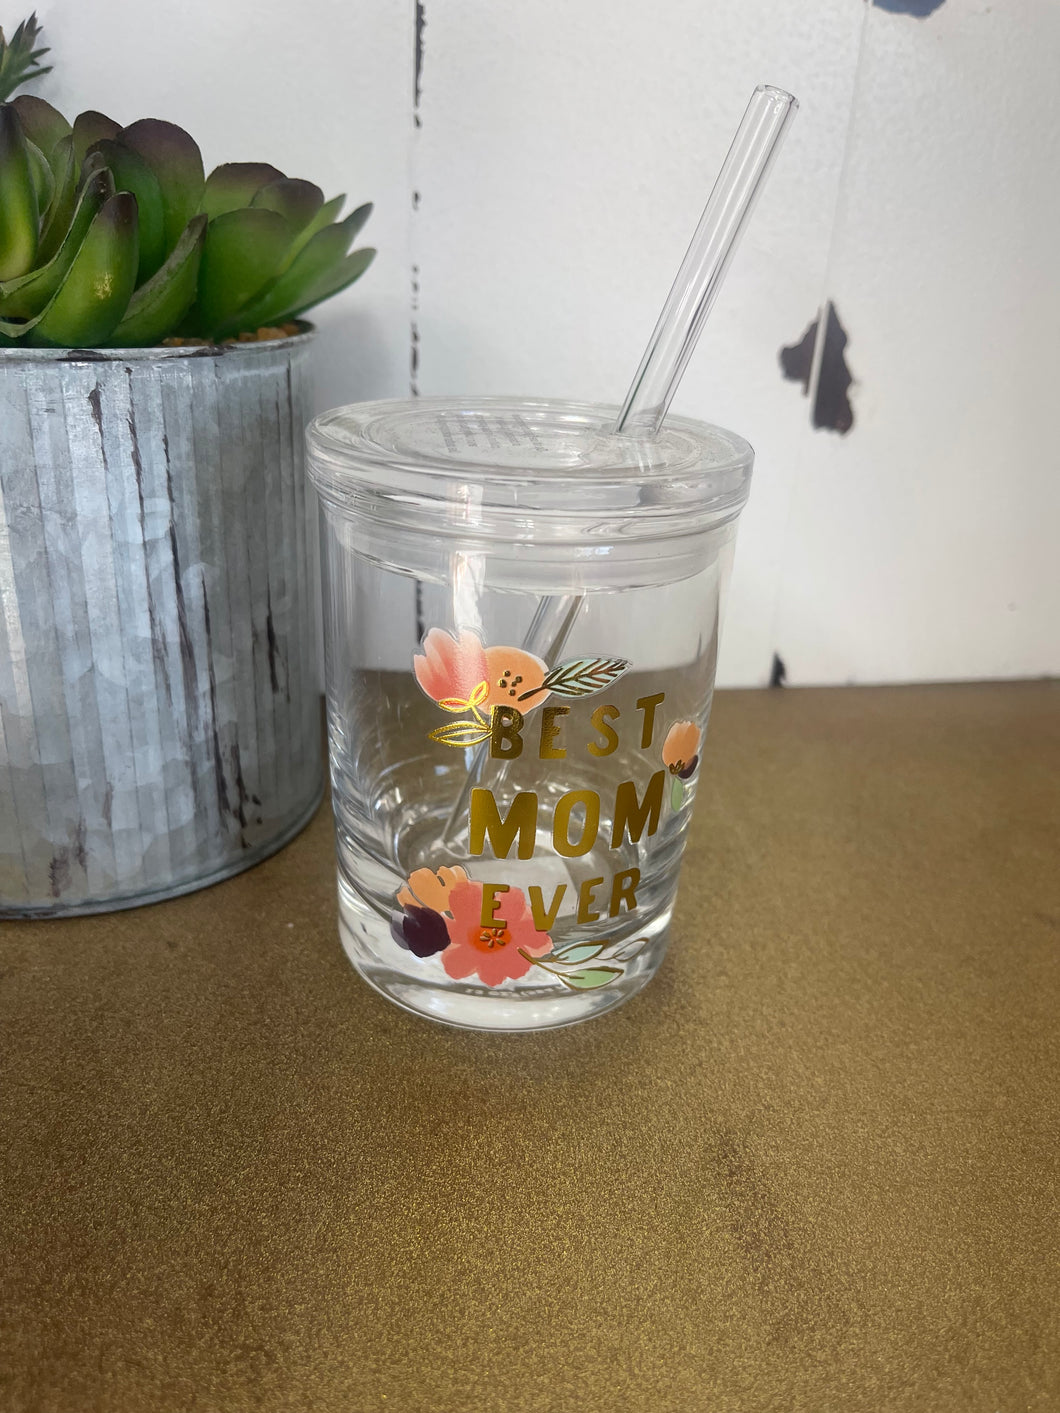 Best Mom Ever - Glass with glass strow and lid